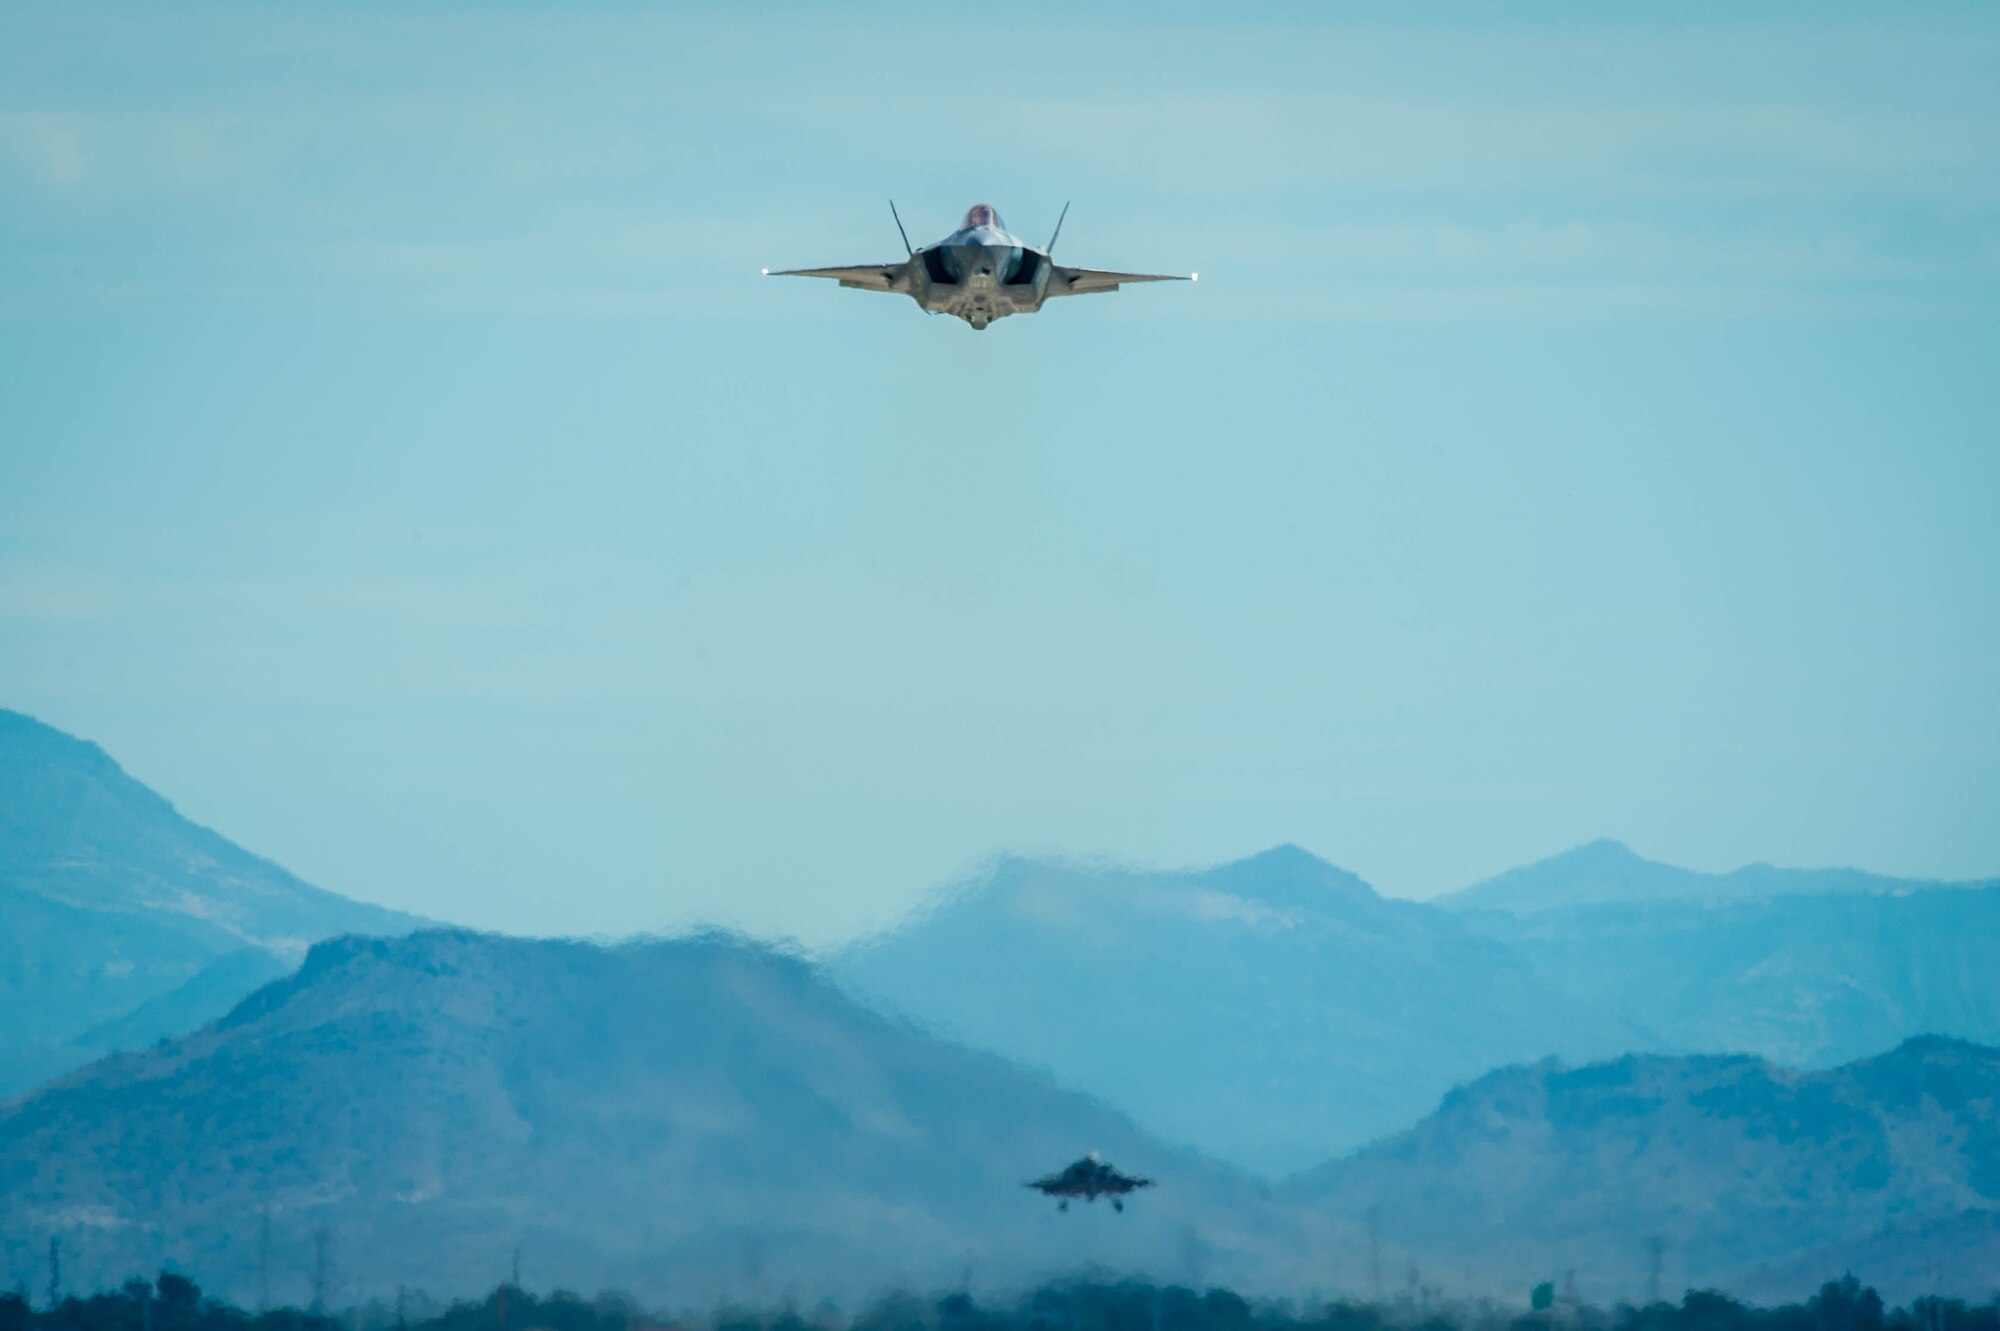 Photo shows two F-35 aircraft taking off with mountains in the background.